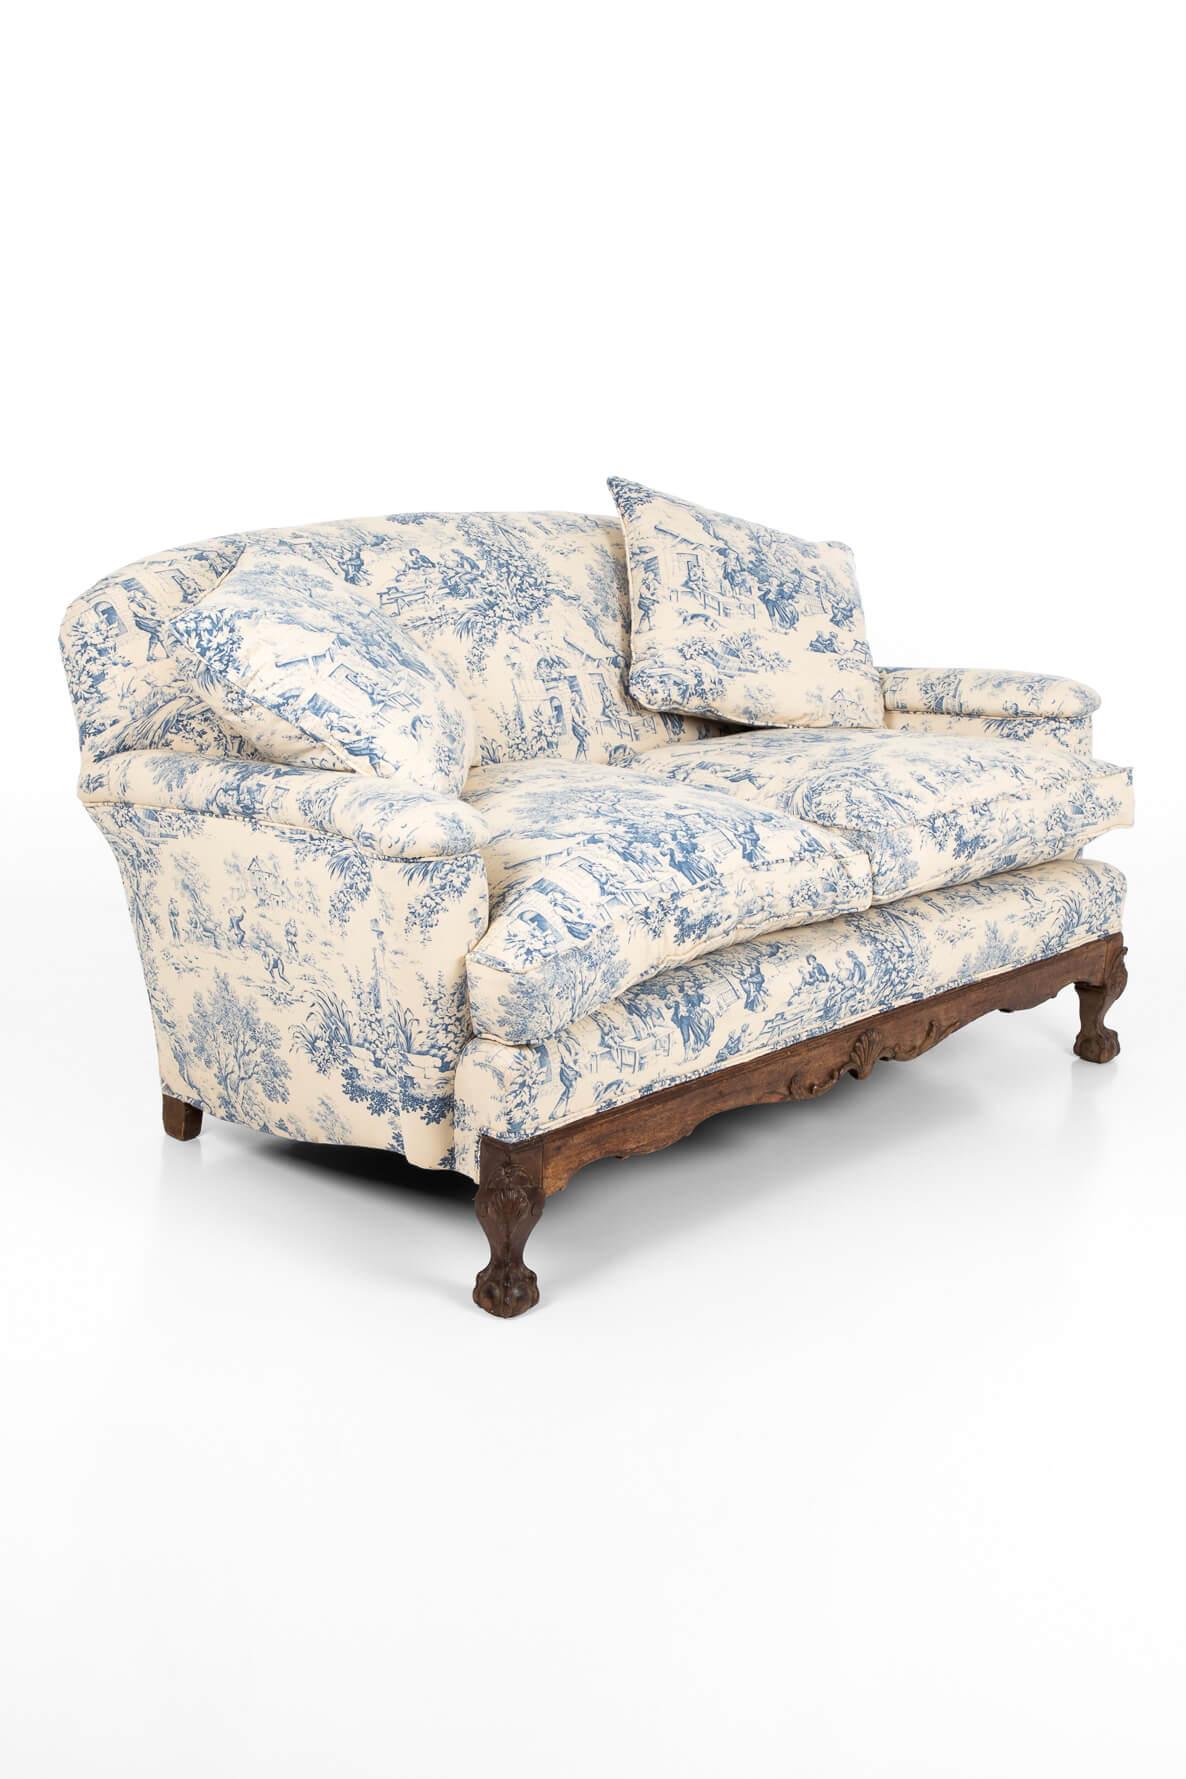 A wonderful late 19th century walnut framed sofa, with claw and ball feet over a humpback frame. Generously proportioned and immaculately presented in Toile de Jouy fabric, displaying romantic and pastoral patterns. The sofa has been fully restored